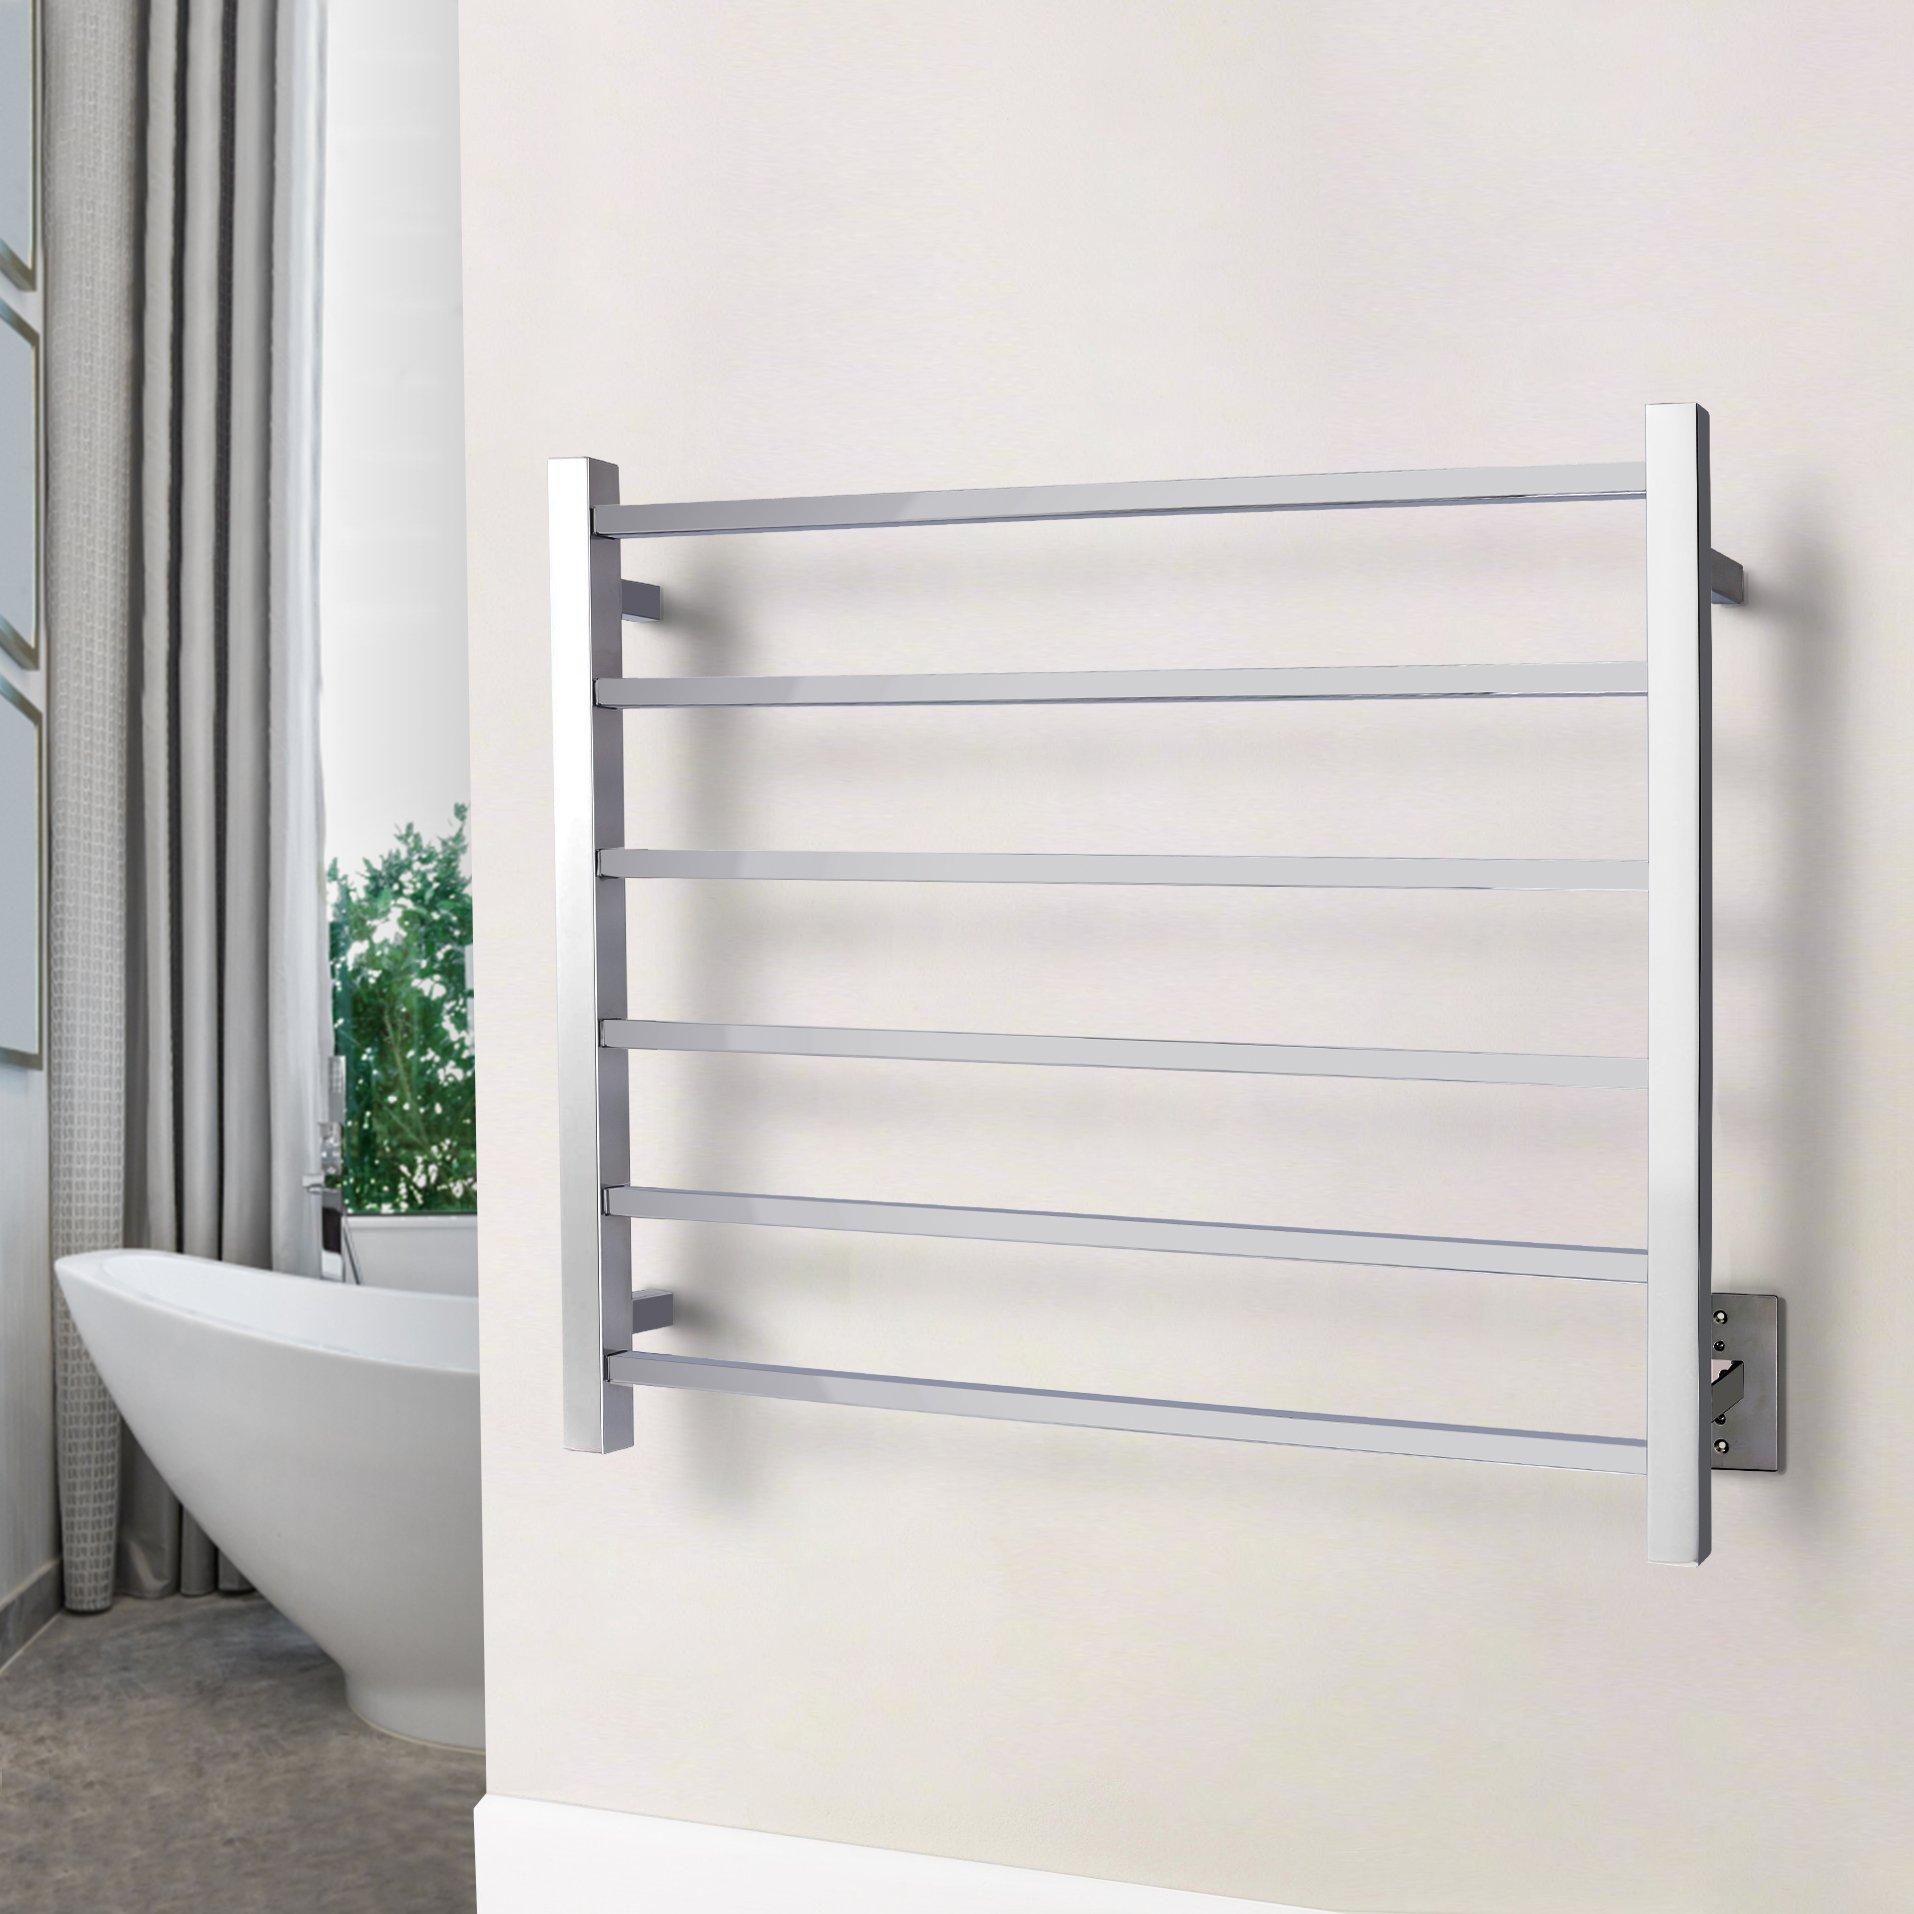 Oasis Towels: The Importance of Using Towel Warmers